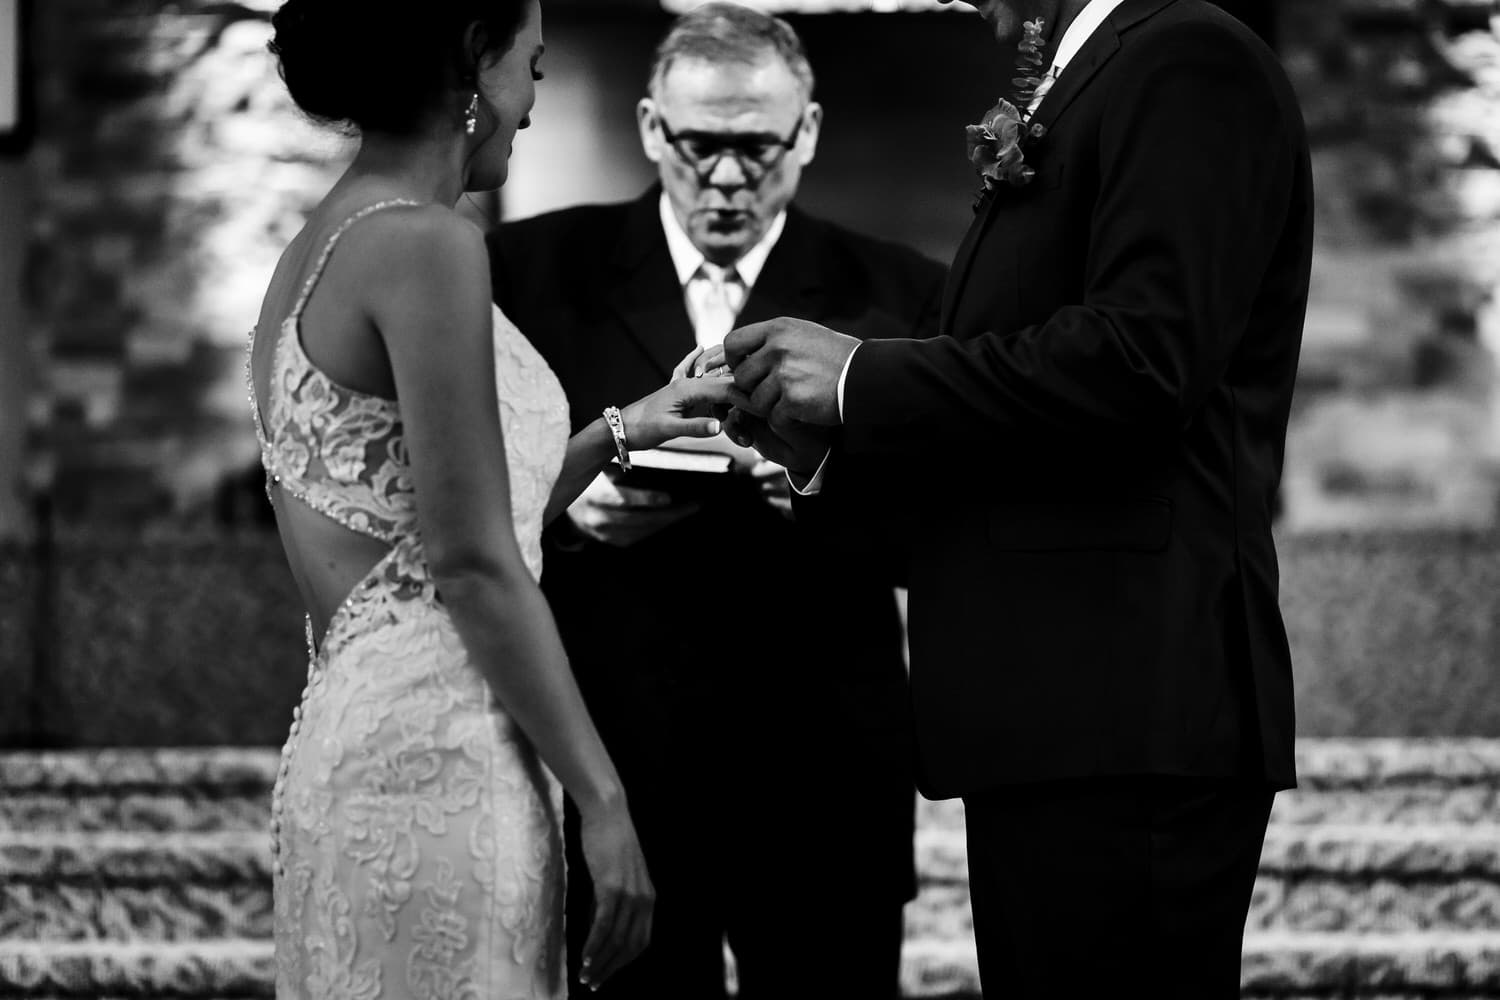 A candid black and white picture of a groom putting a wedding band on his bride's hand during their intimate church wedding ceremony in Kansas City. 